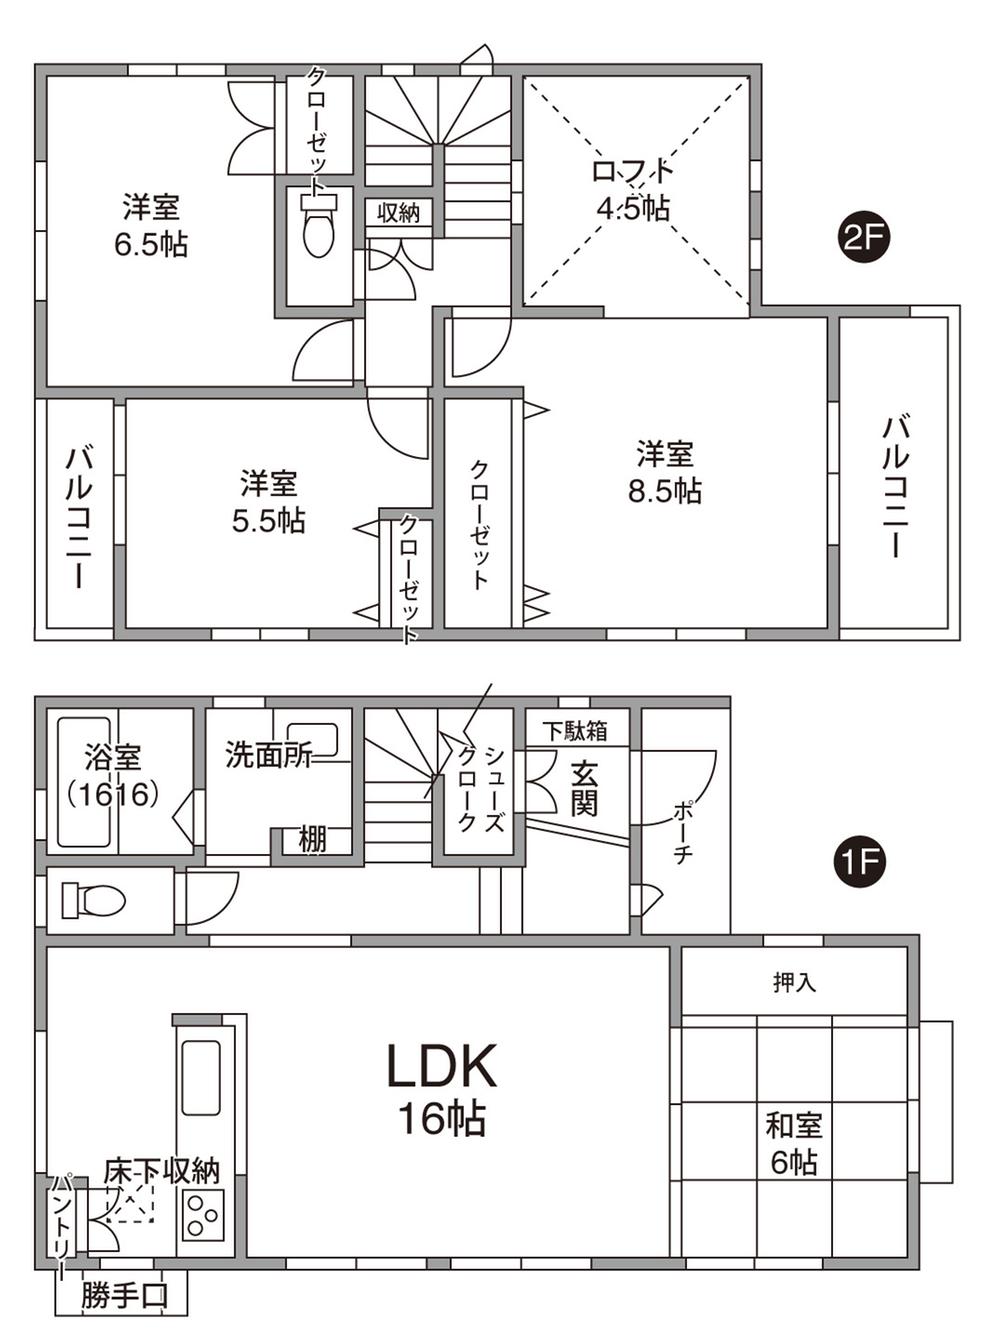 Floor plan. 27,950,000 yen, 3LDK, Land area 100.96 sq m , We will update the building area 100.6 sq m at any time construction progress.  Enjoy. 